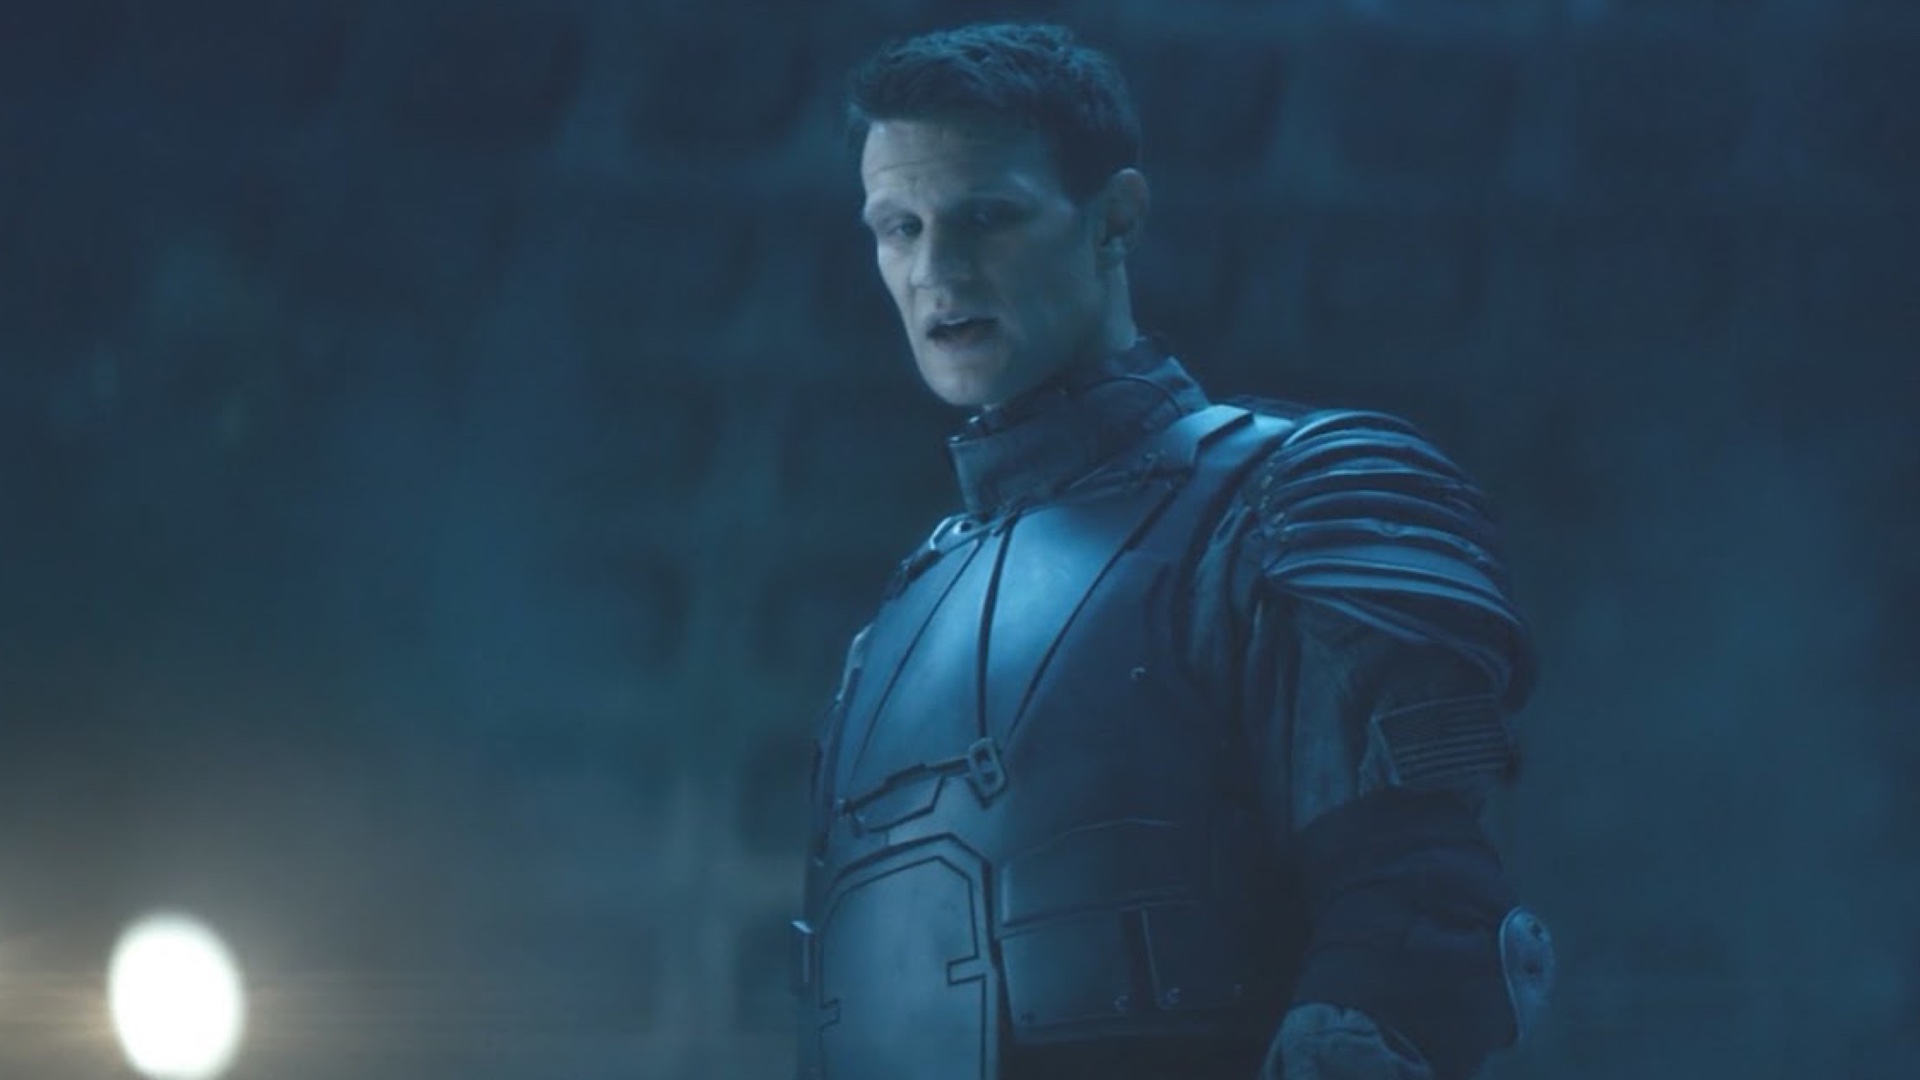 Who was Matt Smith's The Rise of Skywalker character? - Quora